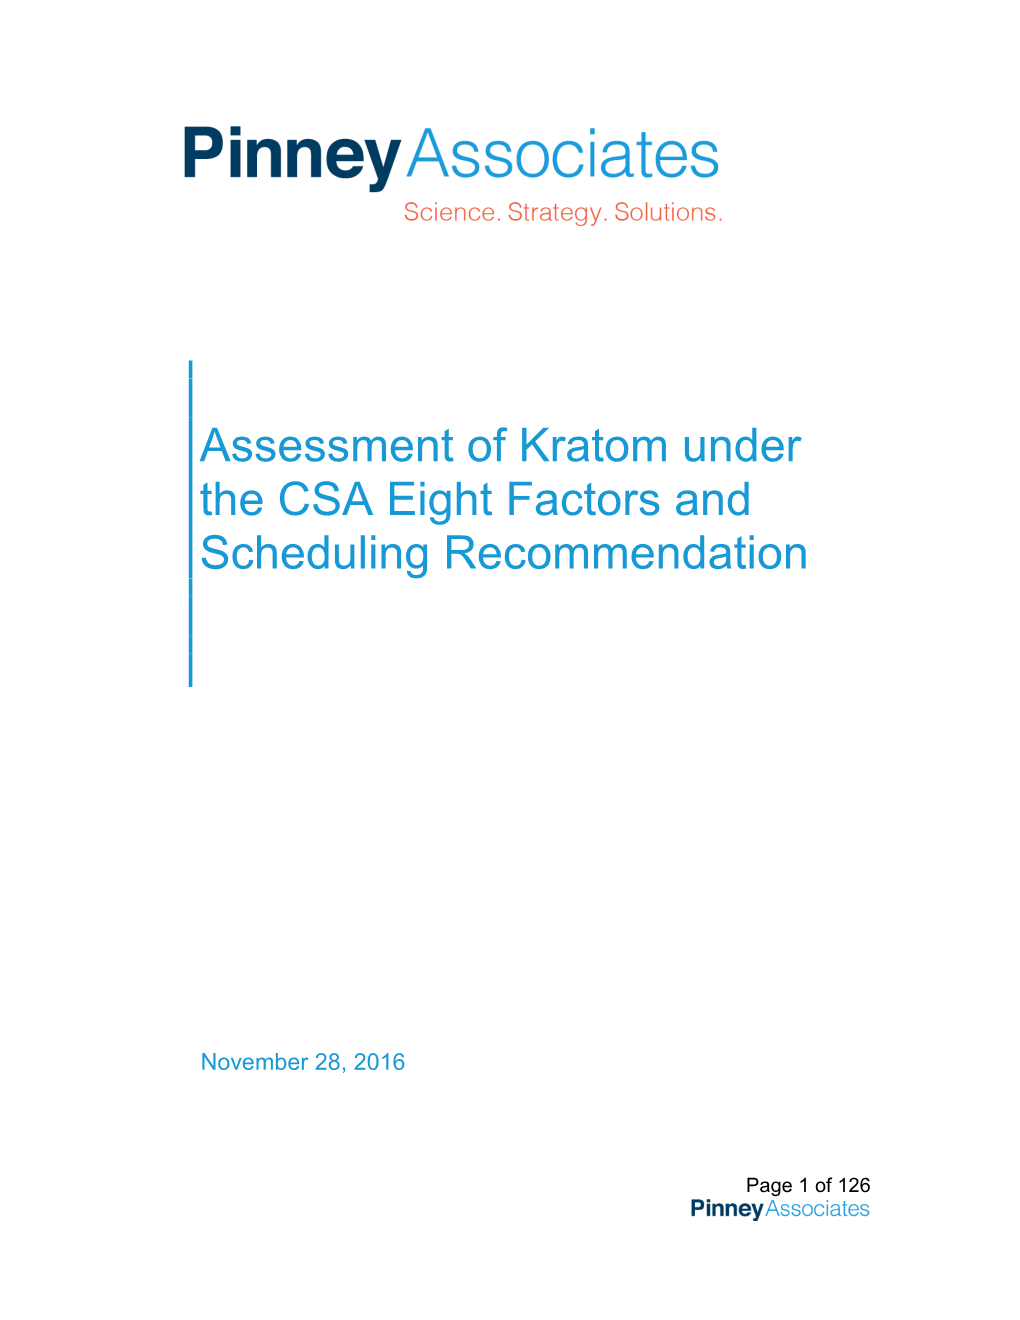 Assessment of Kratom Under the CSA Eight Factors and Scheduling Recommendation